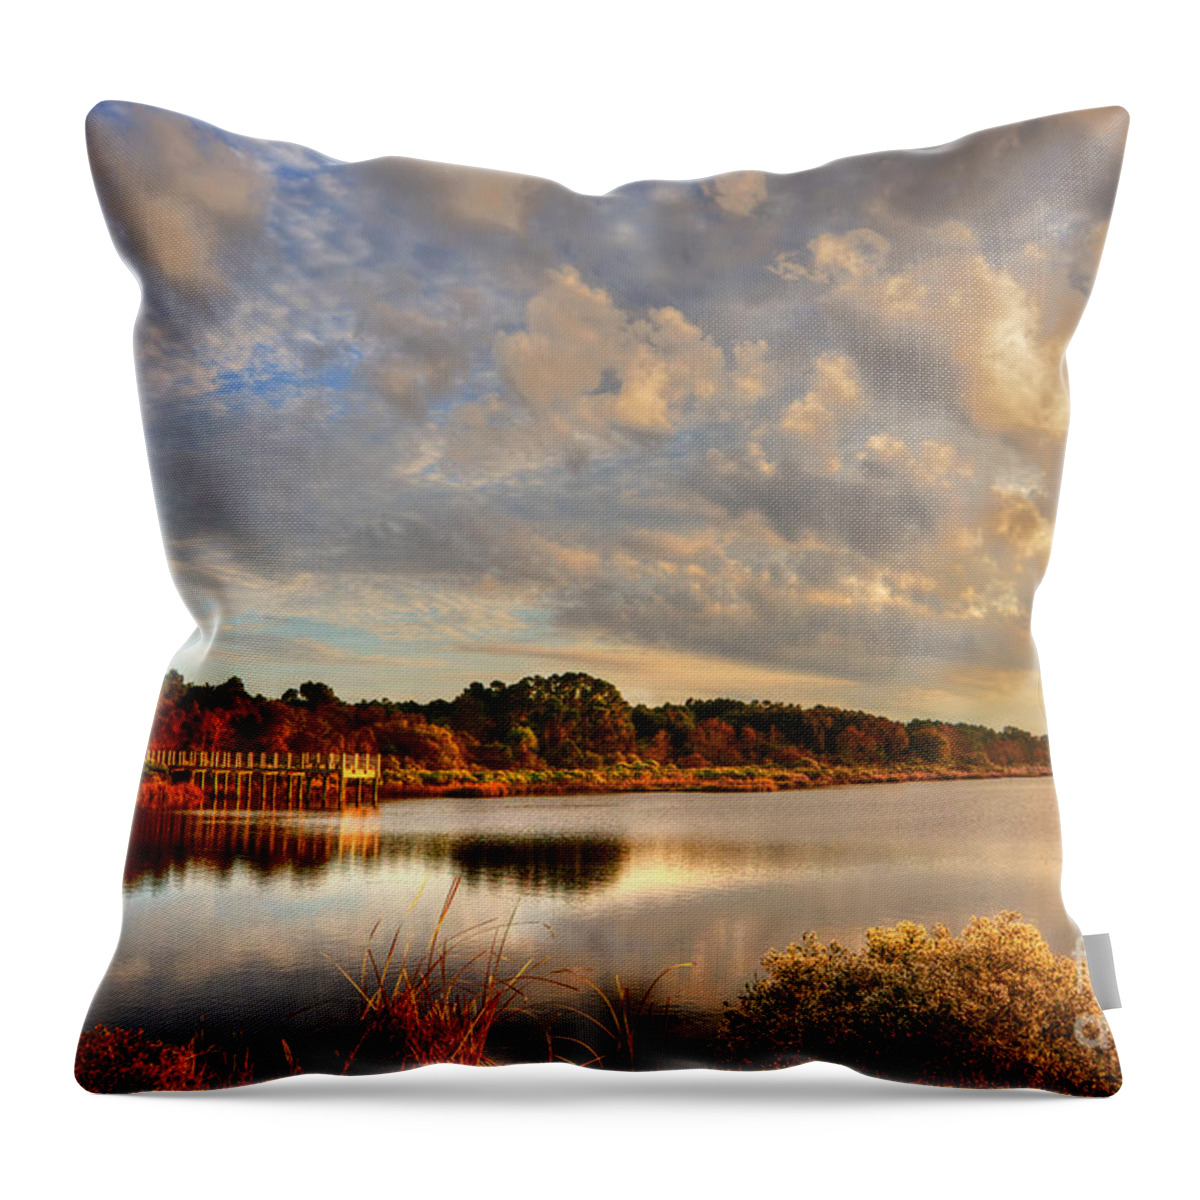 Scenic Throw Pillow featuring the photograph Huntington Beach At Dusk by Kathy Baccari